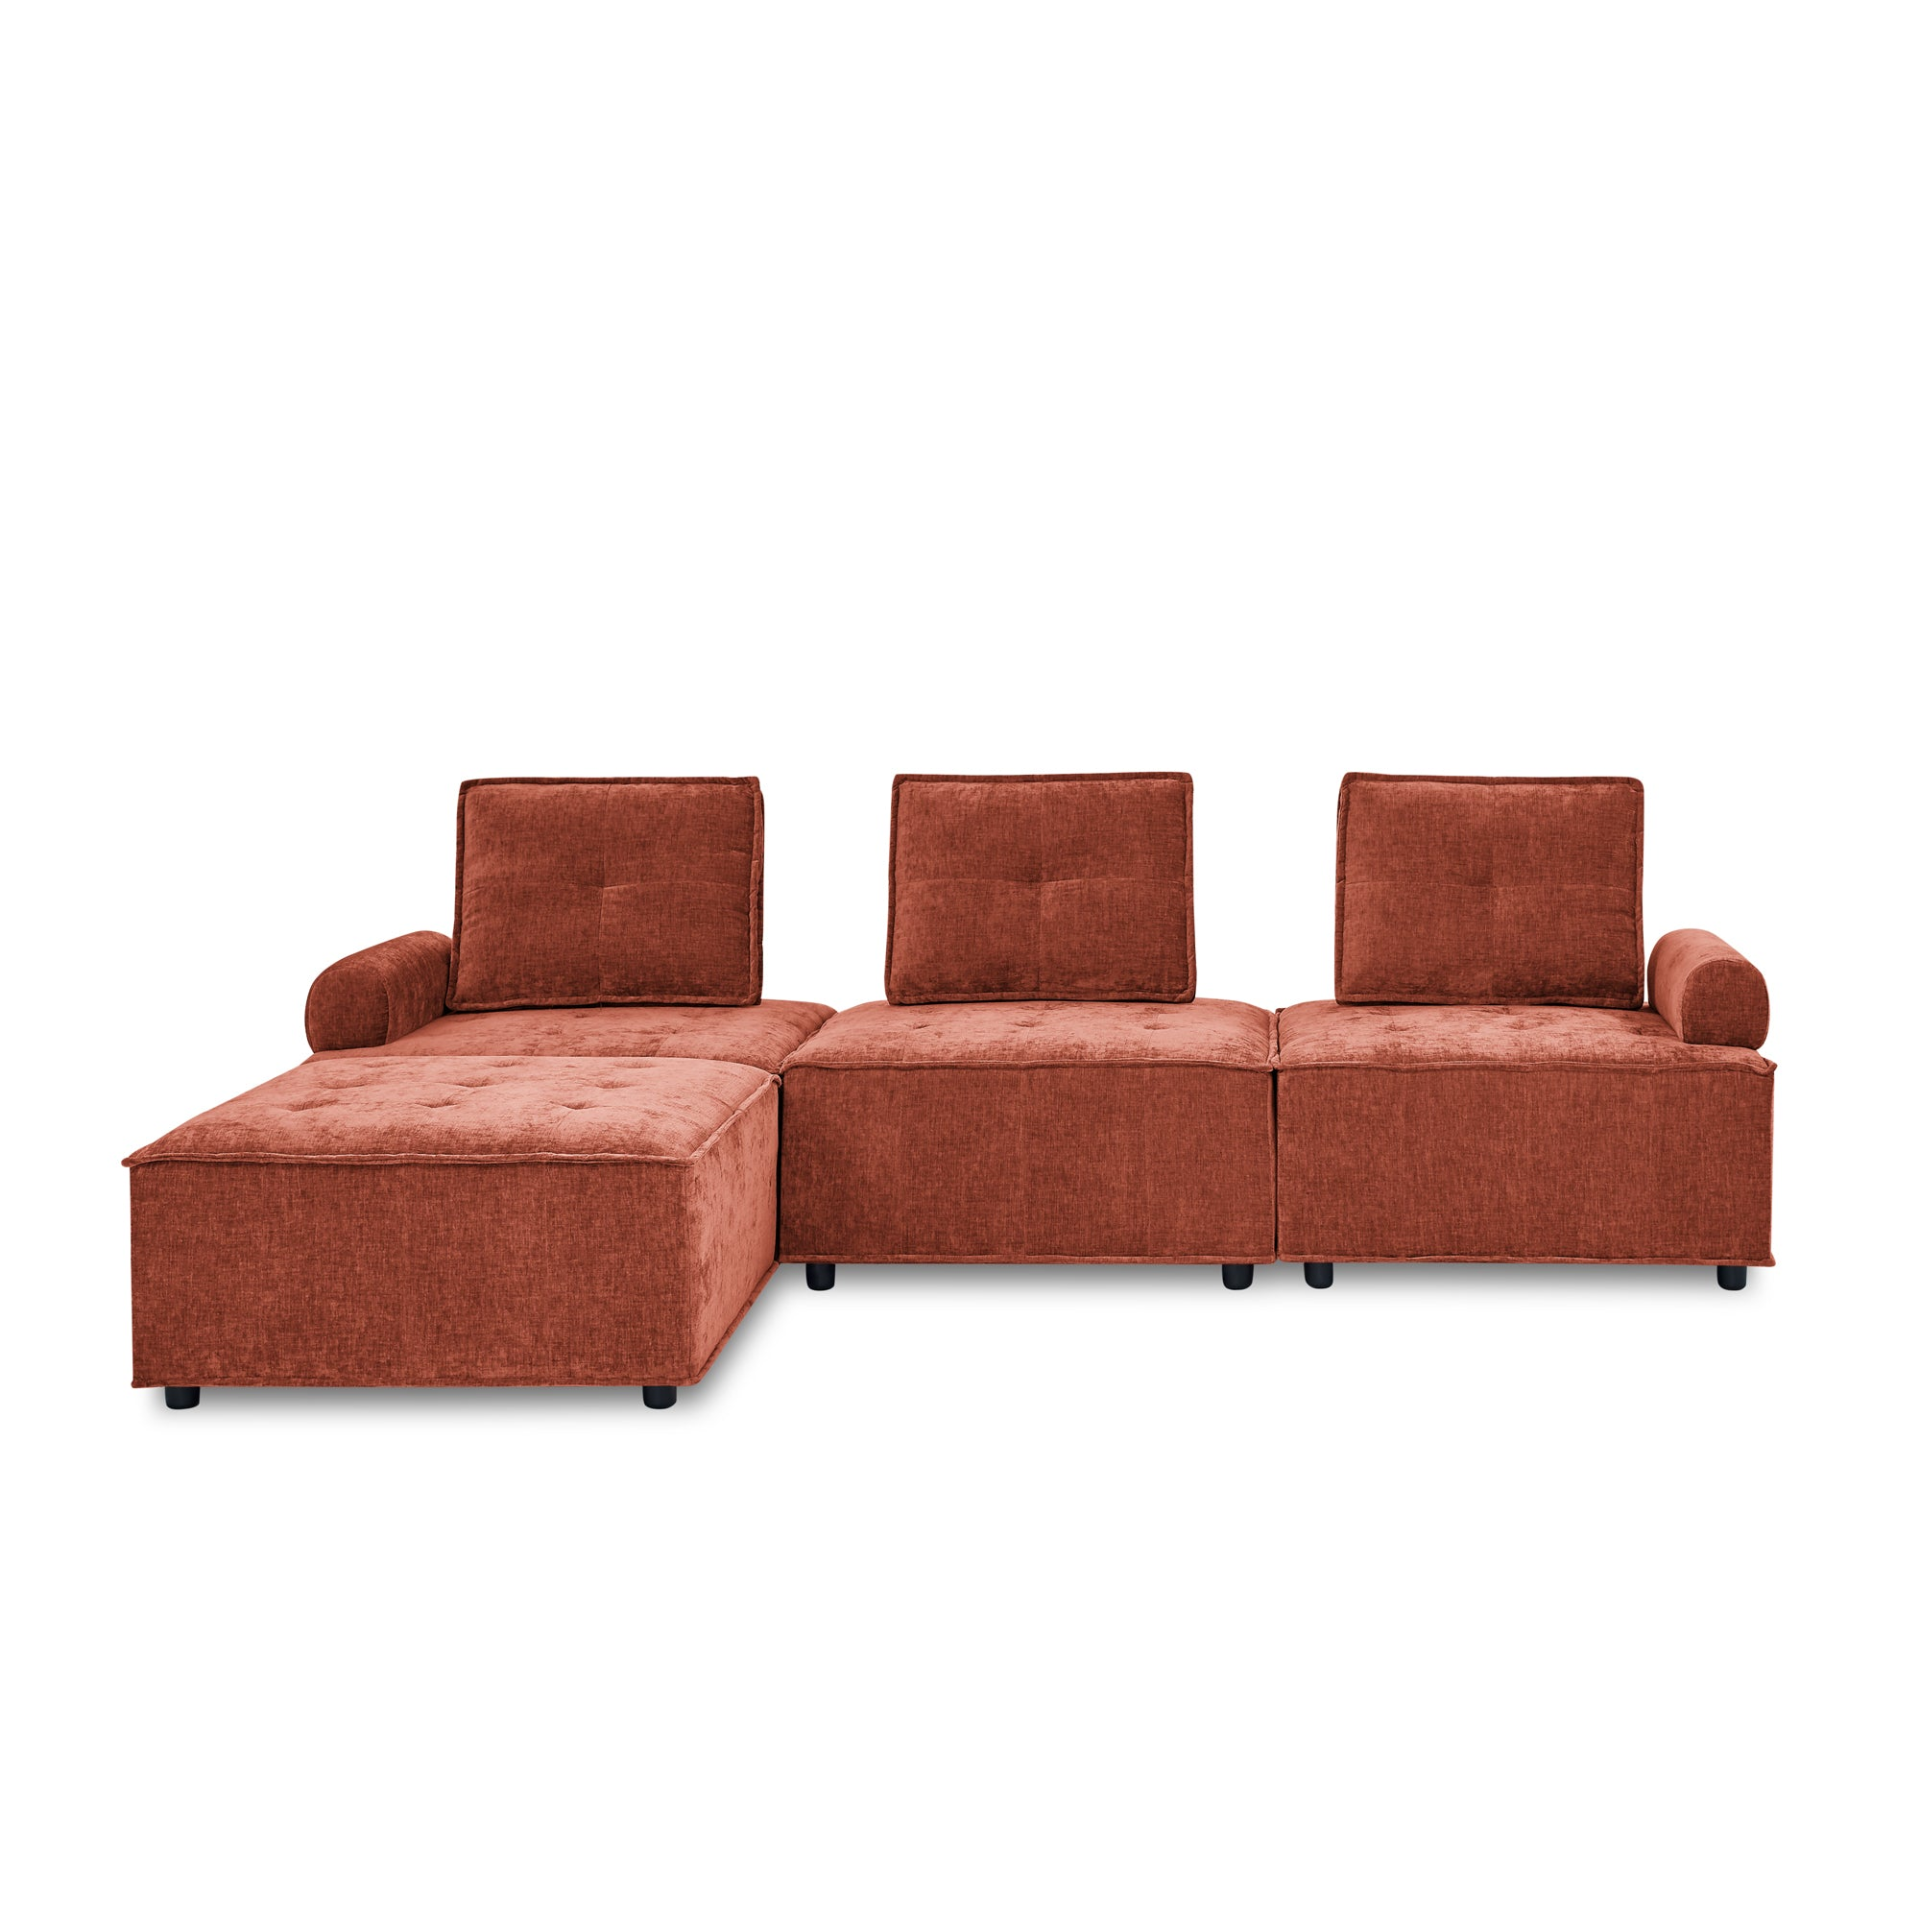 Red-Orange Remix L-Shape Modular Sectional Sofa in Chenille